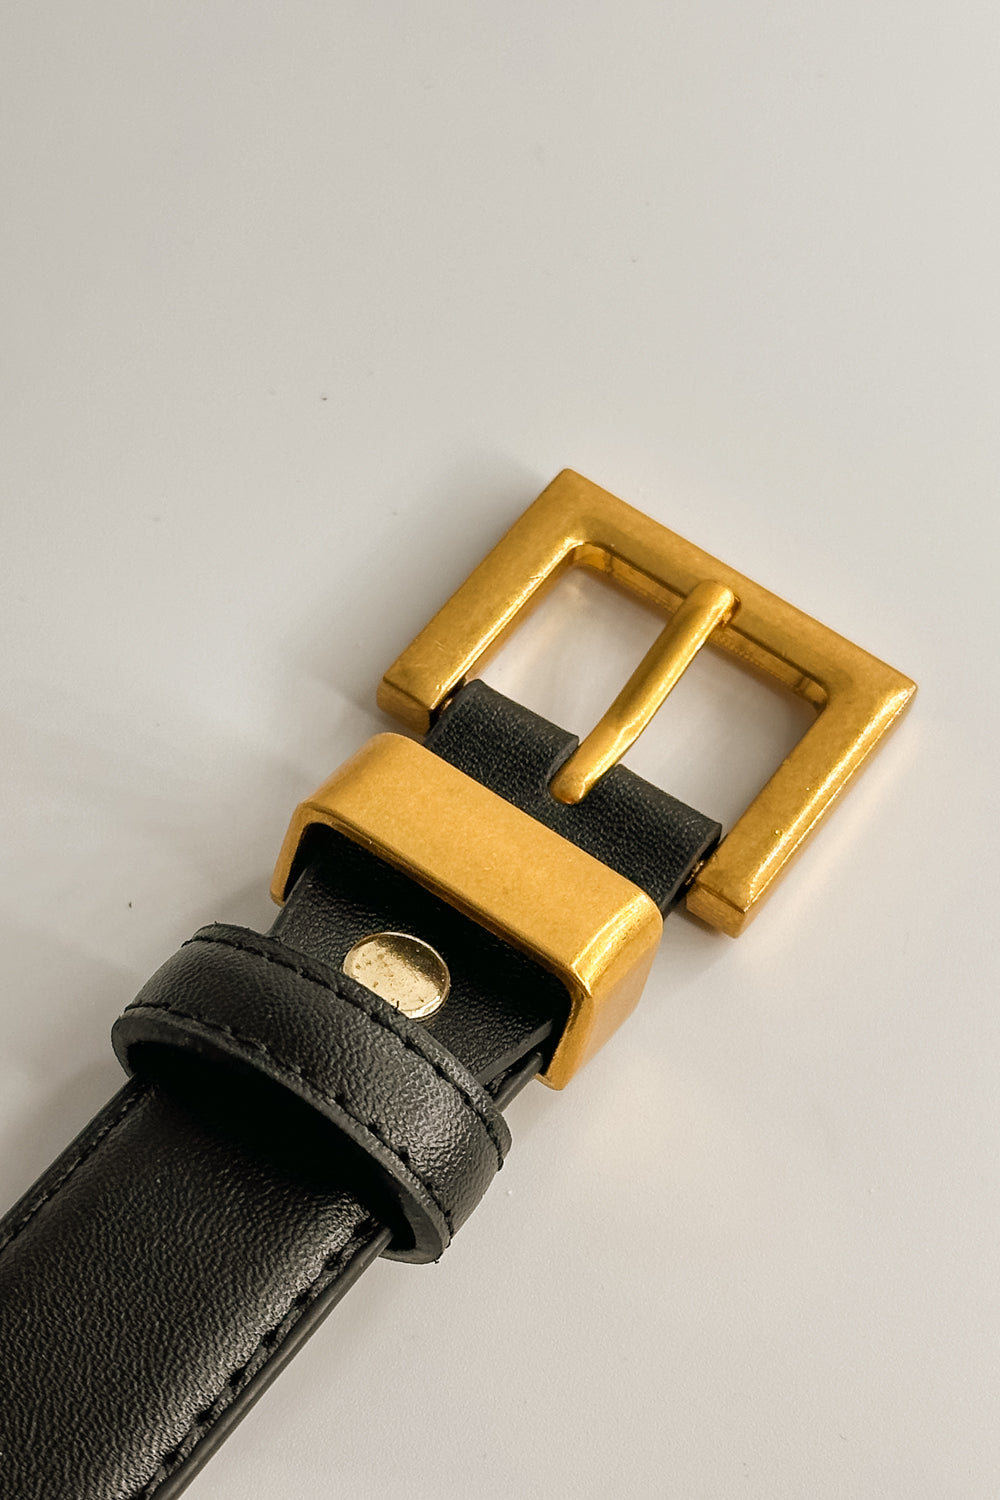 Close up view of female model wearing the Ariana Black Slim Square Buckle Belt which features  Black Leather Fabric  and Gold Square Adjustable Buckle